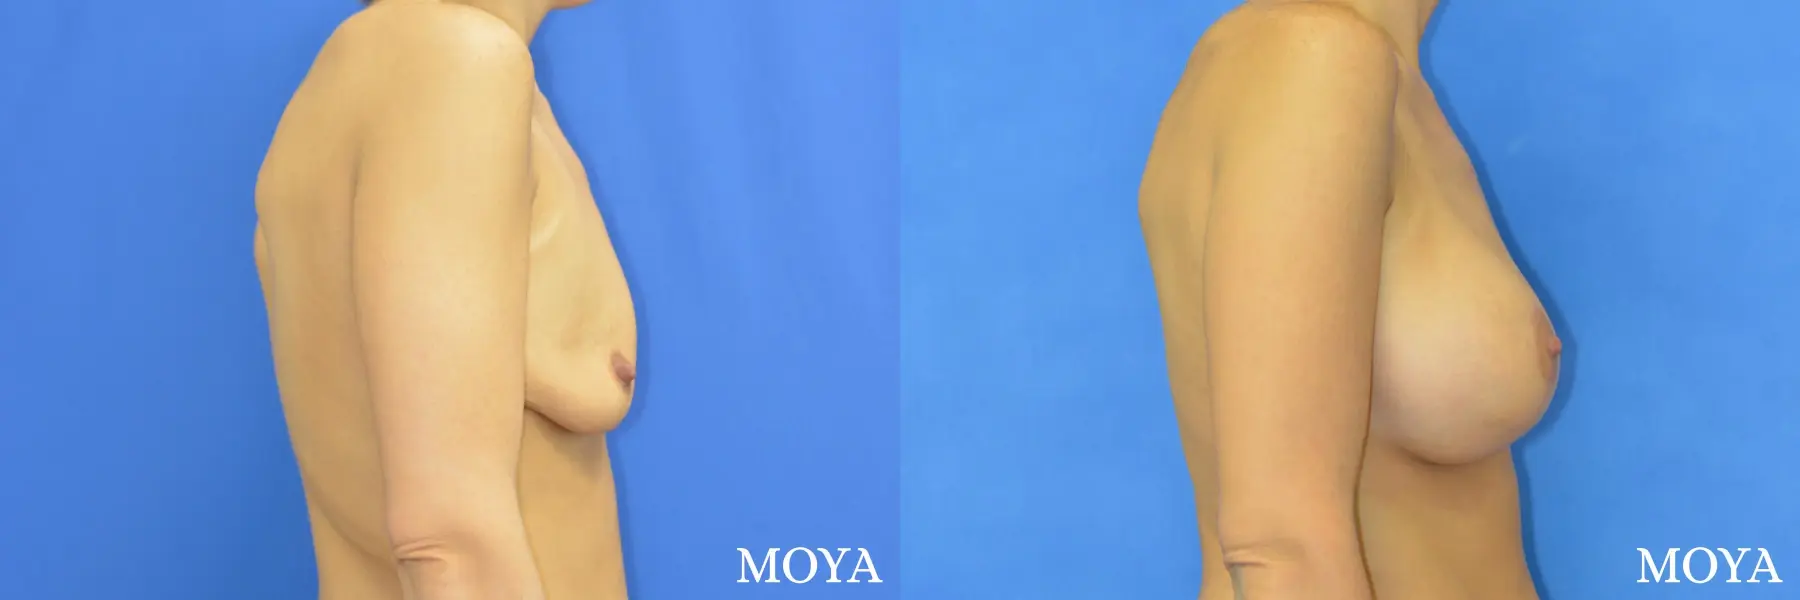 Breast Augmentation With Lift: Patient 1 - Before and After 2